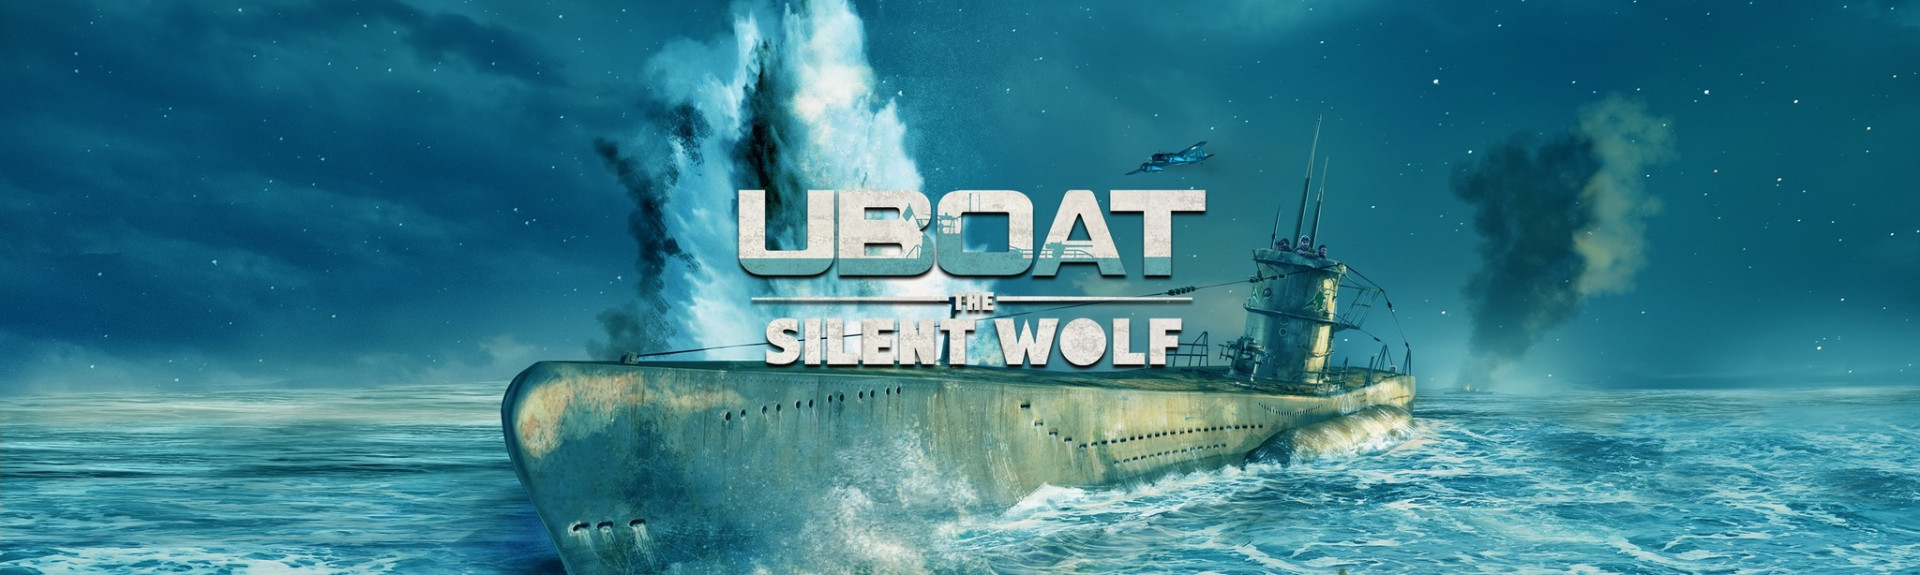 UBOAT: The Silent Wolf